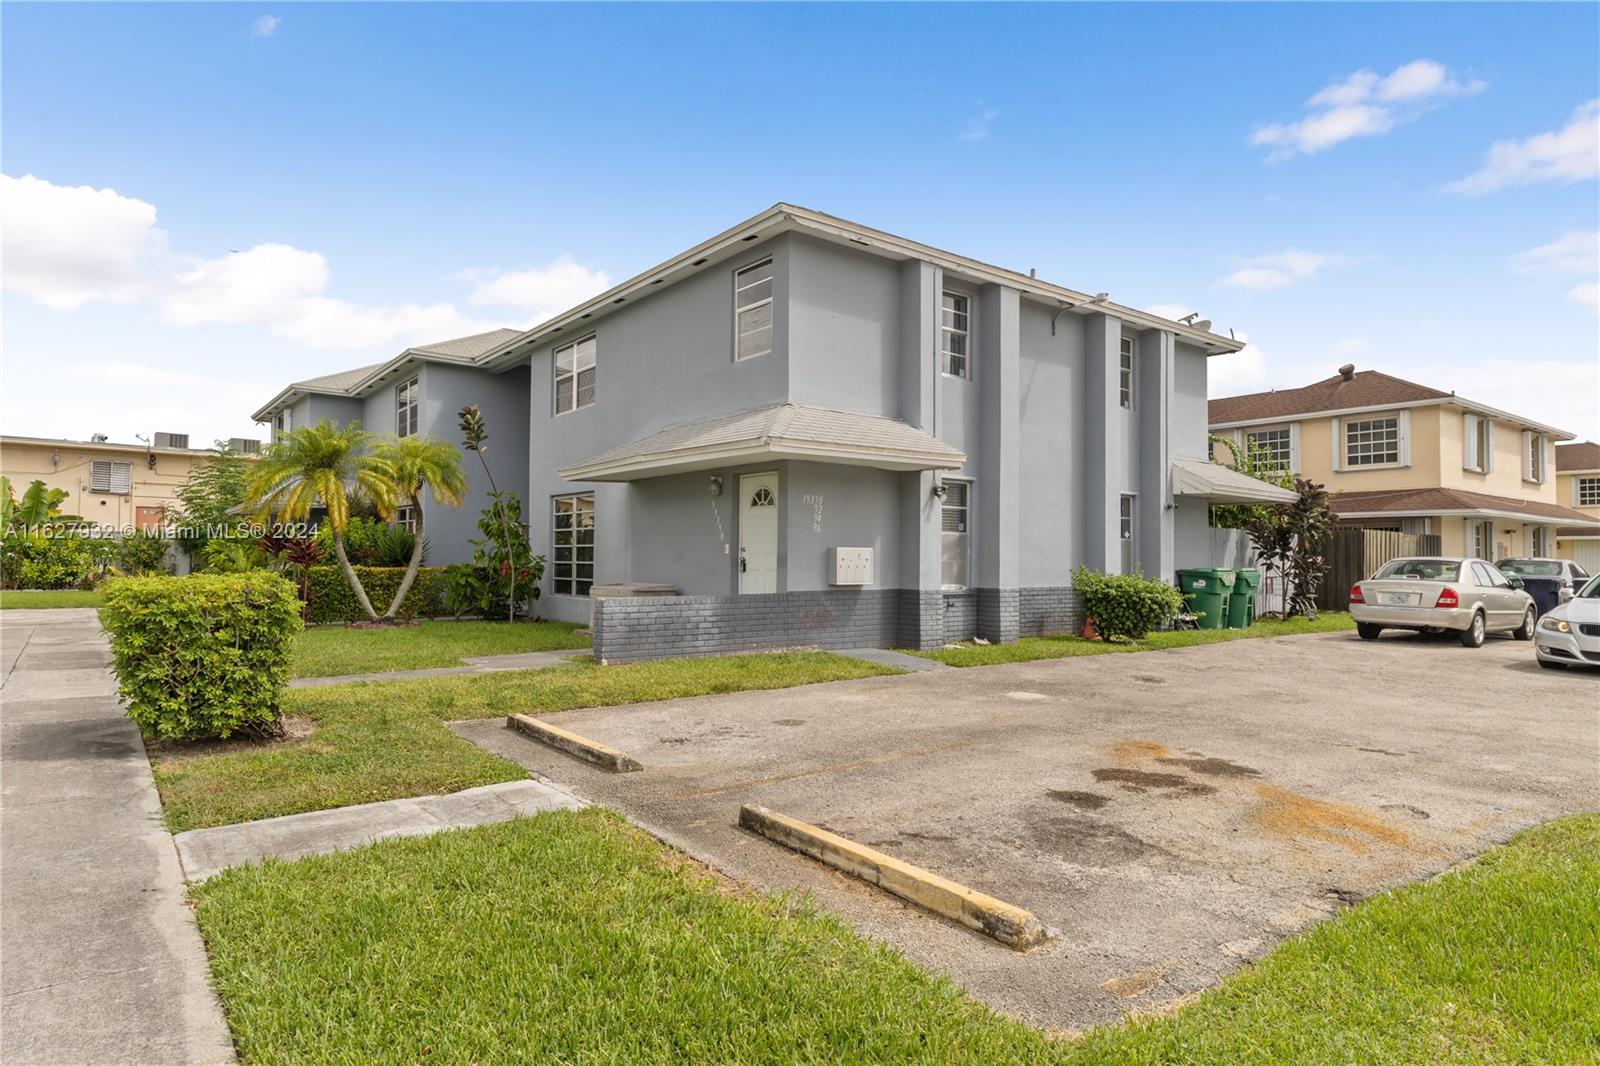 BEAUTIFUL AND WELL KEPT APARTMENT in the heart of Cutler Bay, just 2 blocks from US-1 and 2 minutes from Florida Turnpike, exit 12. This cozy unit features 3 Bedrooms and 1 fully remodeled bathroom, open concept Living-Dining Room & Laundry room inside the unit. One parking space assigned next to the unit and street parking is also available. Close to The Home Depot, CVS, several Shopping Centers, supermarkets & Urgent Cares. HOA fee is only $130 and Approval is not required. Call or text Listing Agent for Showings Instructions.